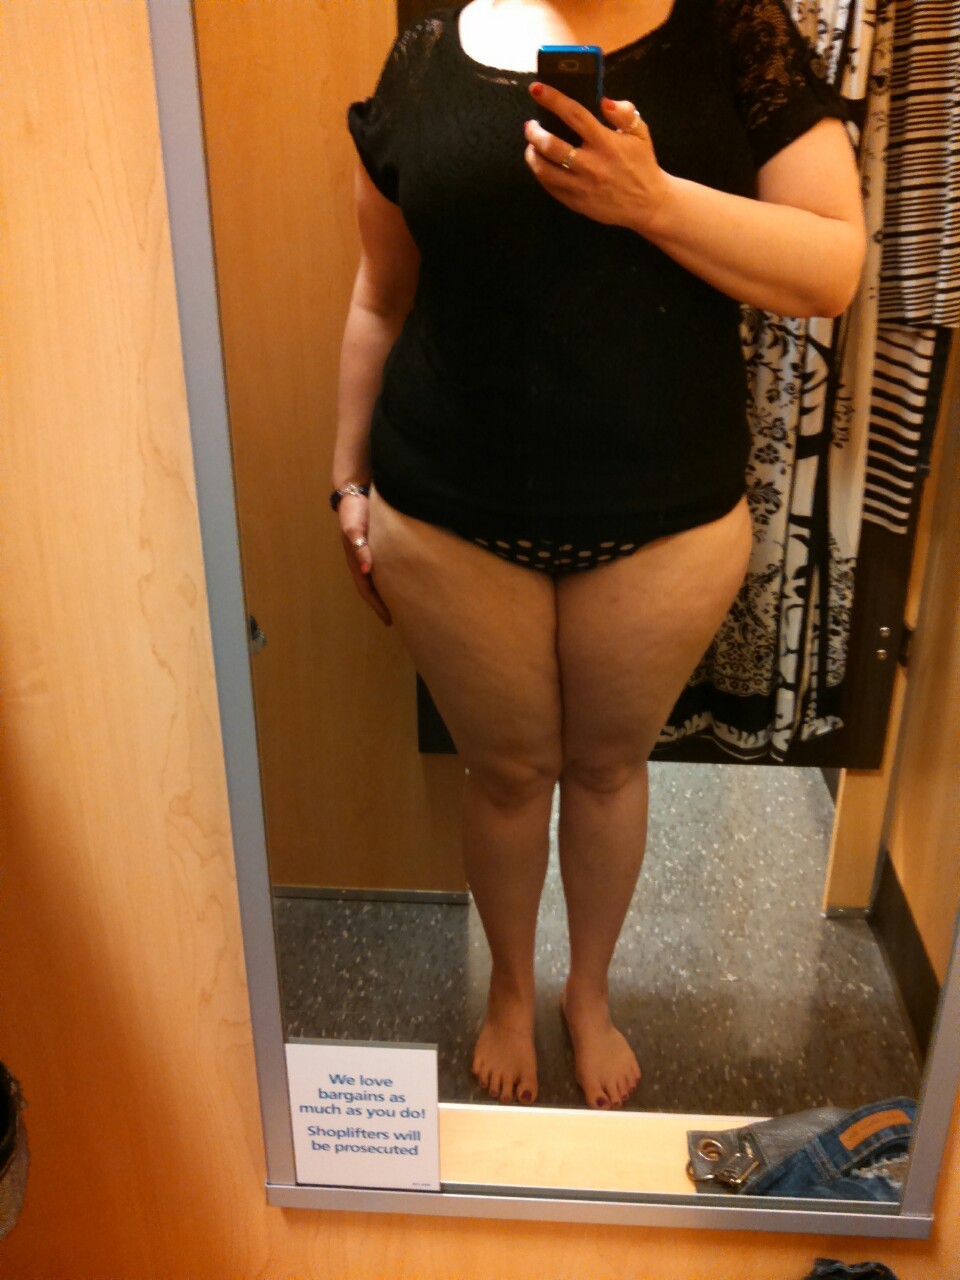 nikkis-double-ds:  How about a dressing room pic. Never done em cuz I hate shopping.